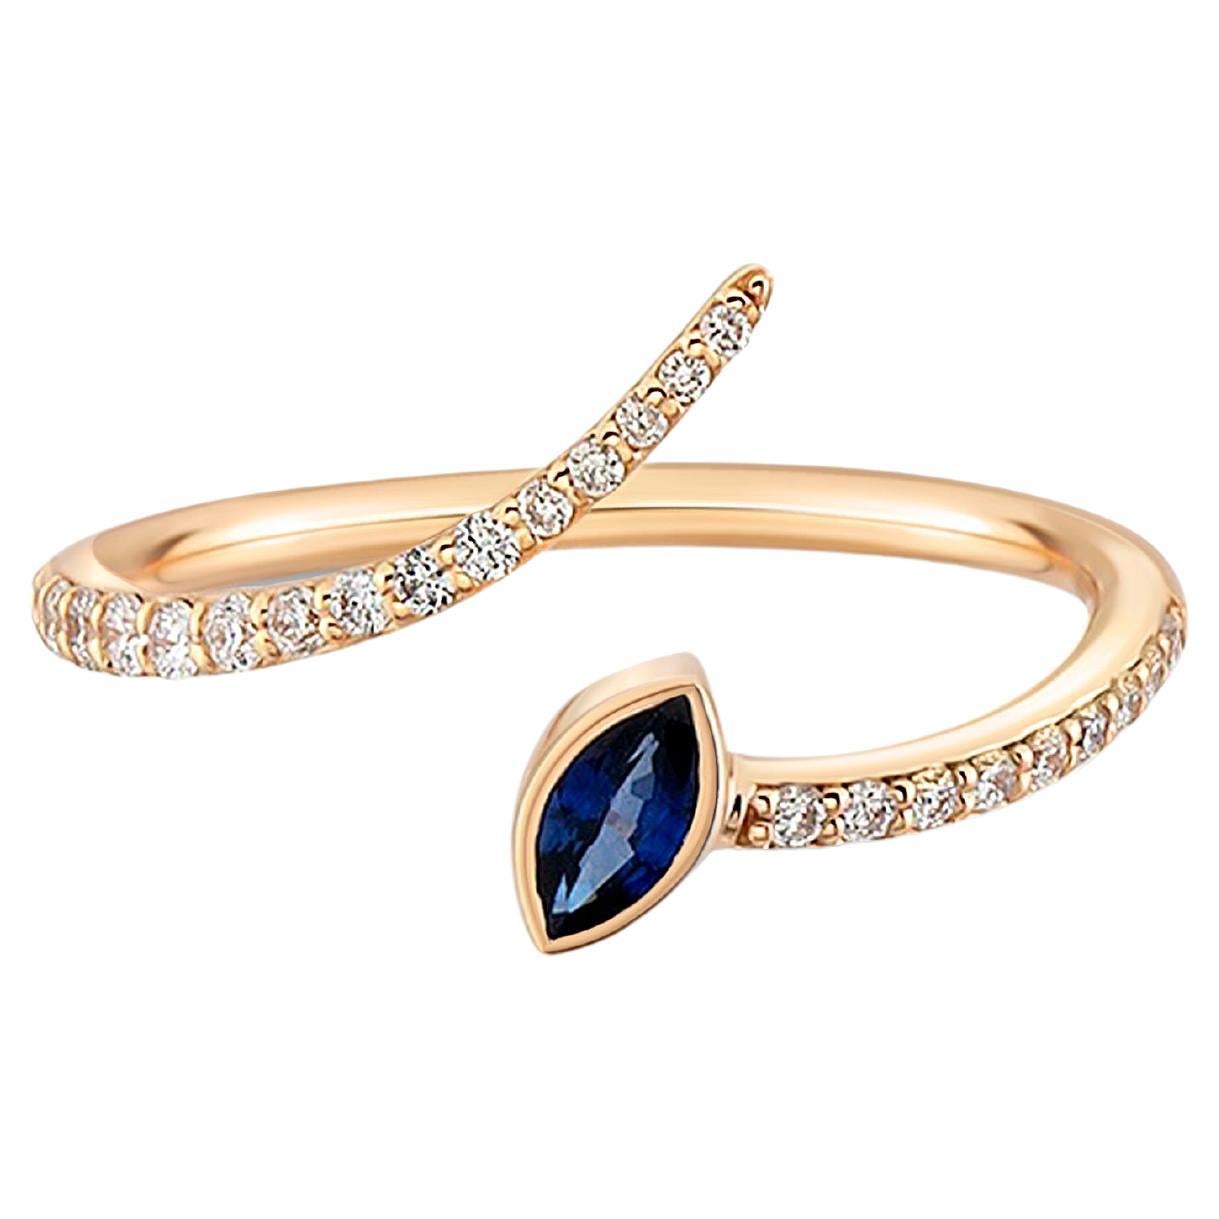 Adjustable blue marquise 14k gold ring. For Sale